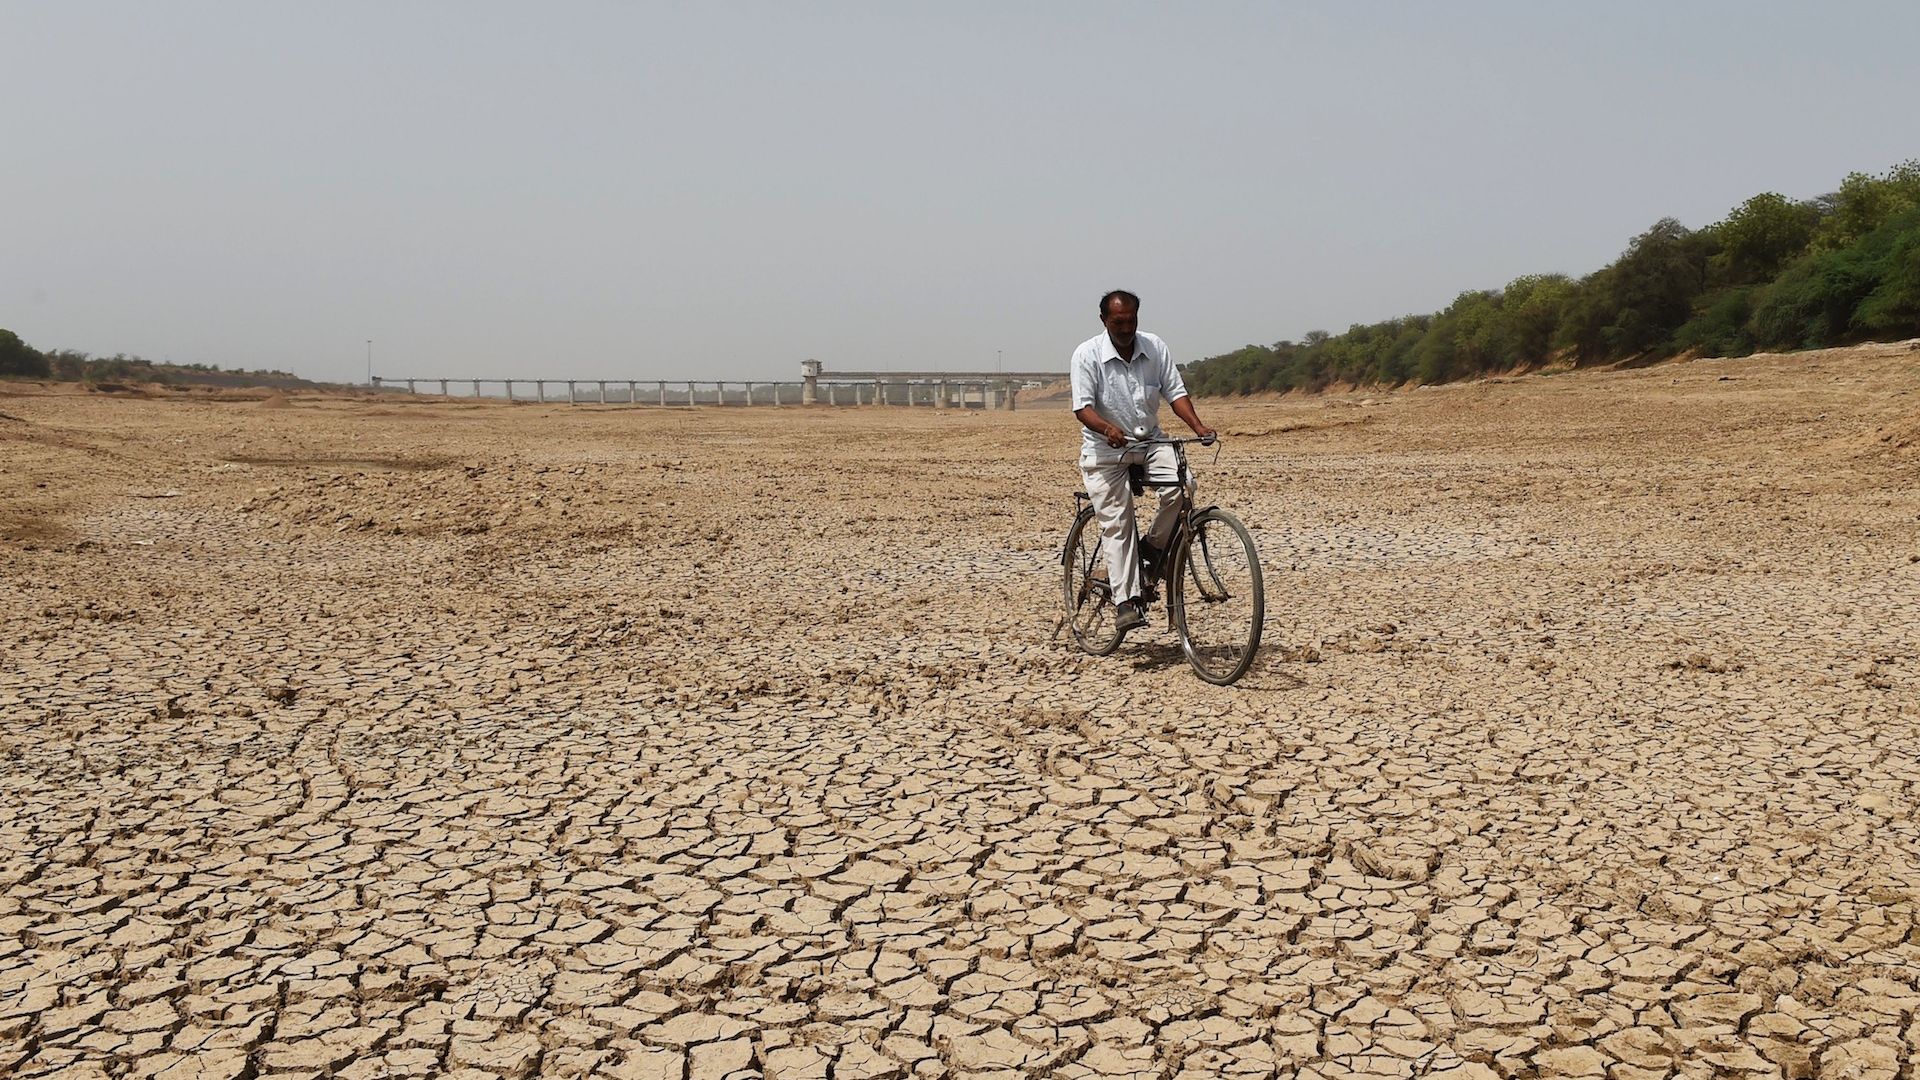 Drought conditions in India.